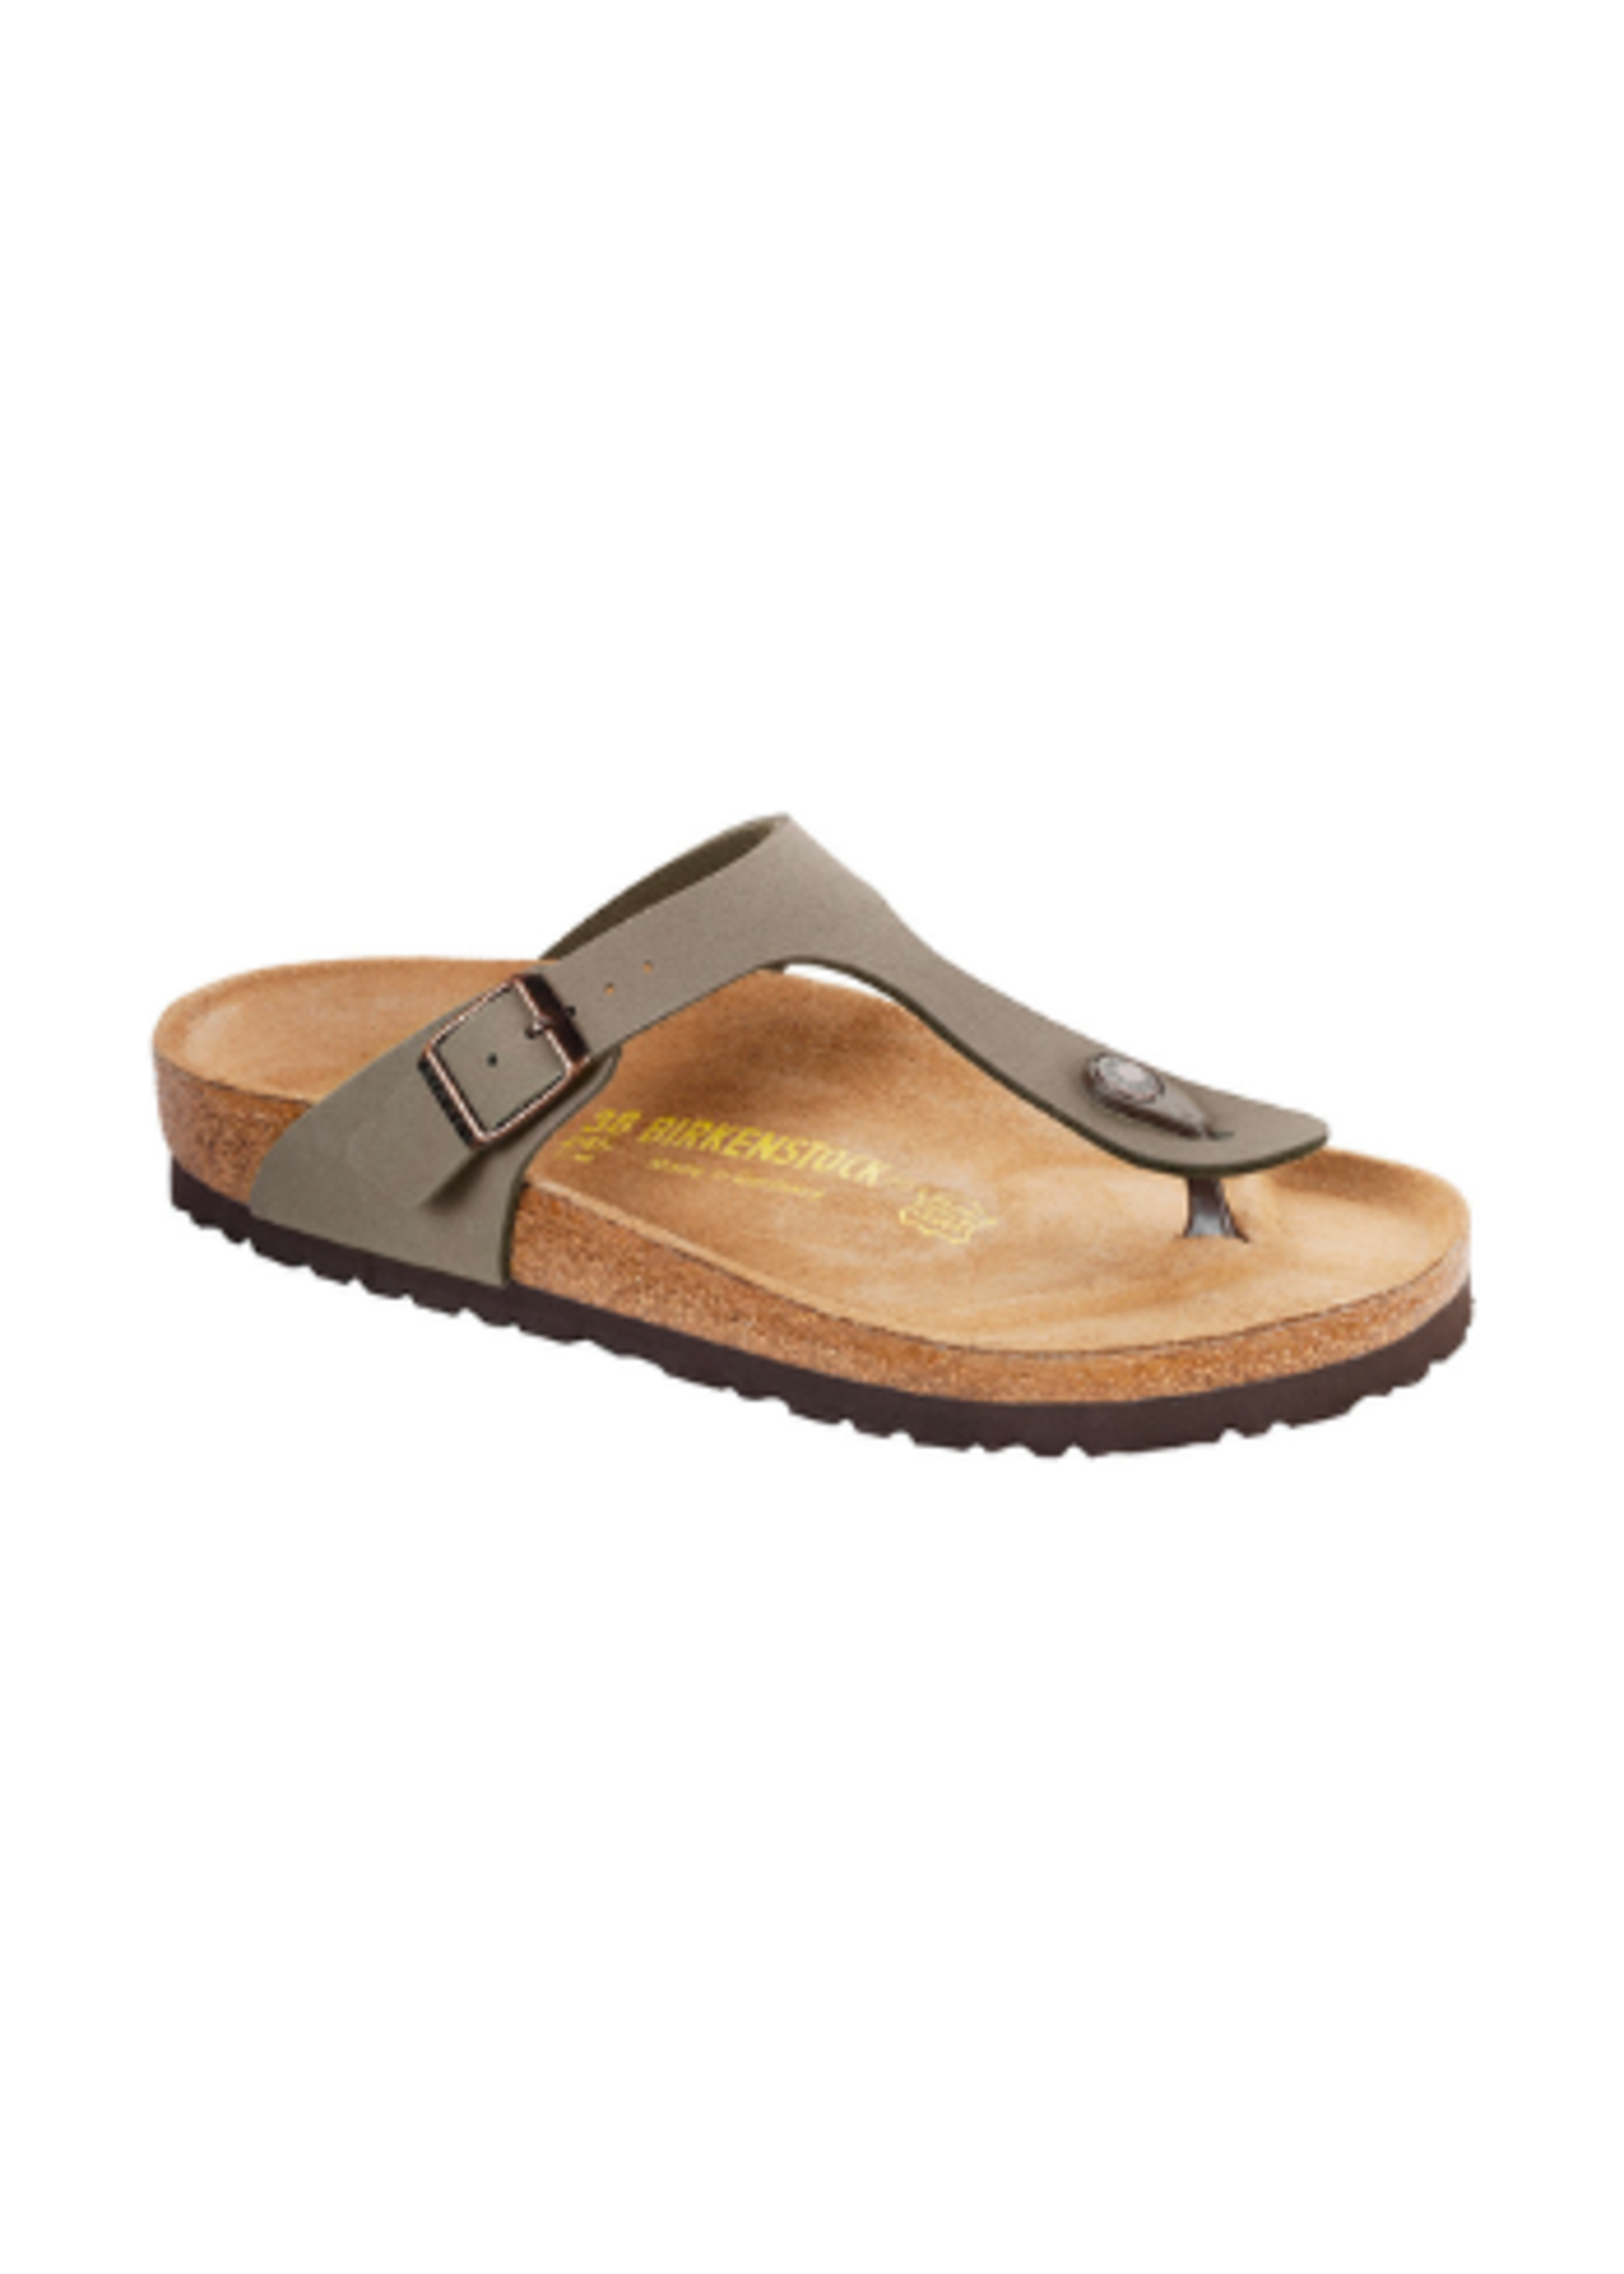 Birkenstock Gizeh Birkibuc in Stone (Classic Footbed - Suede Lined)